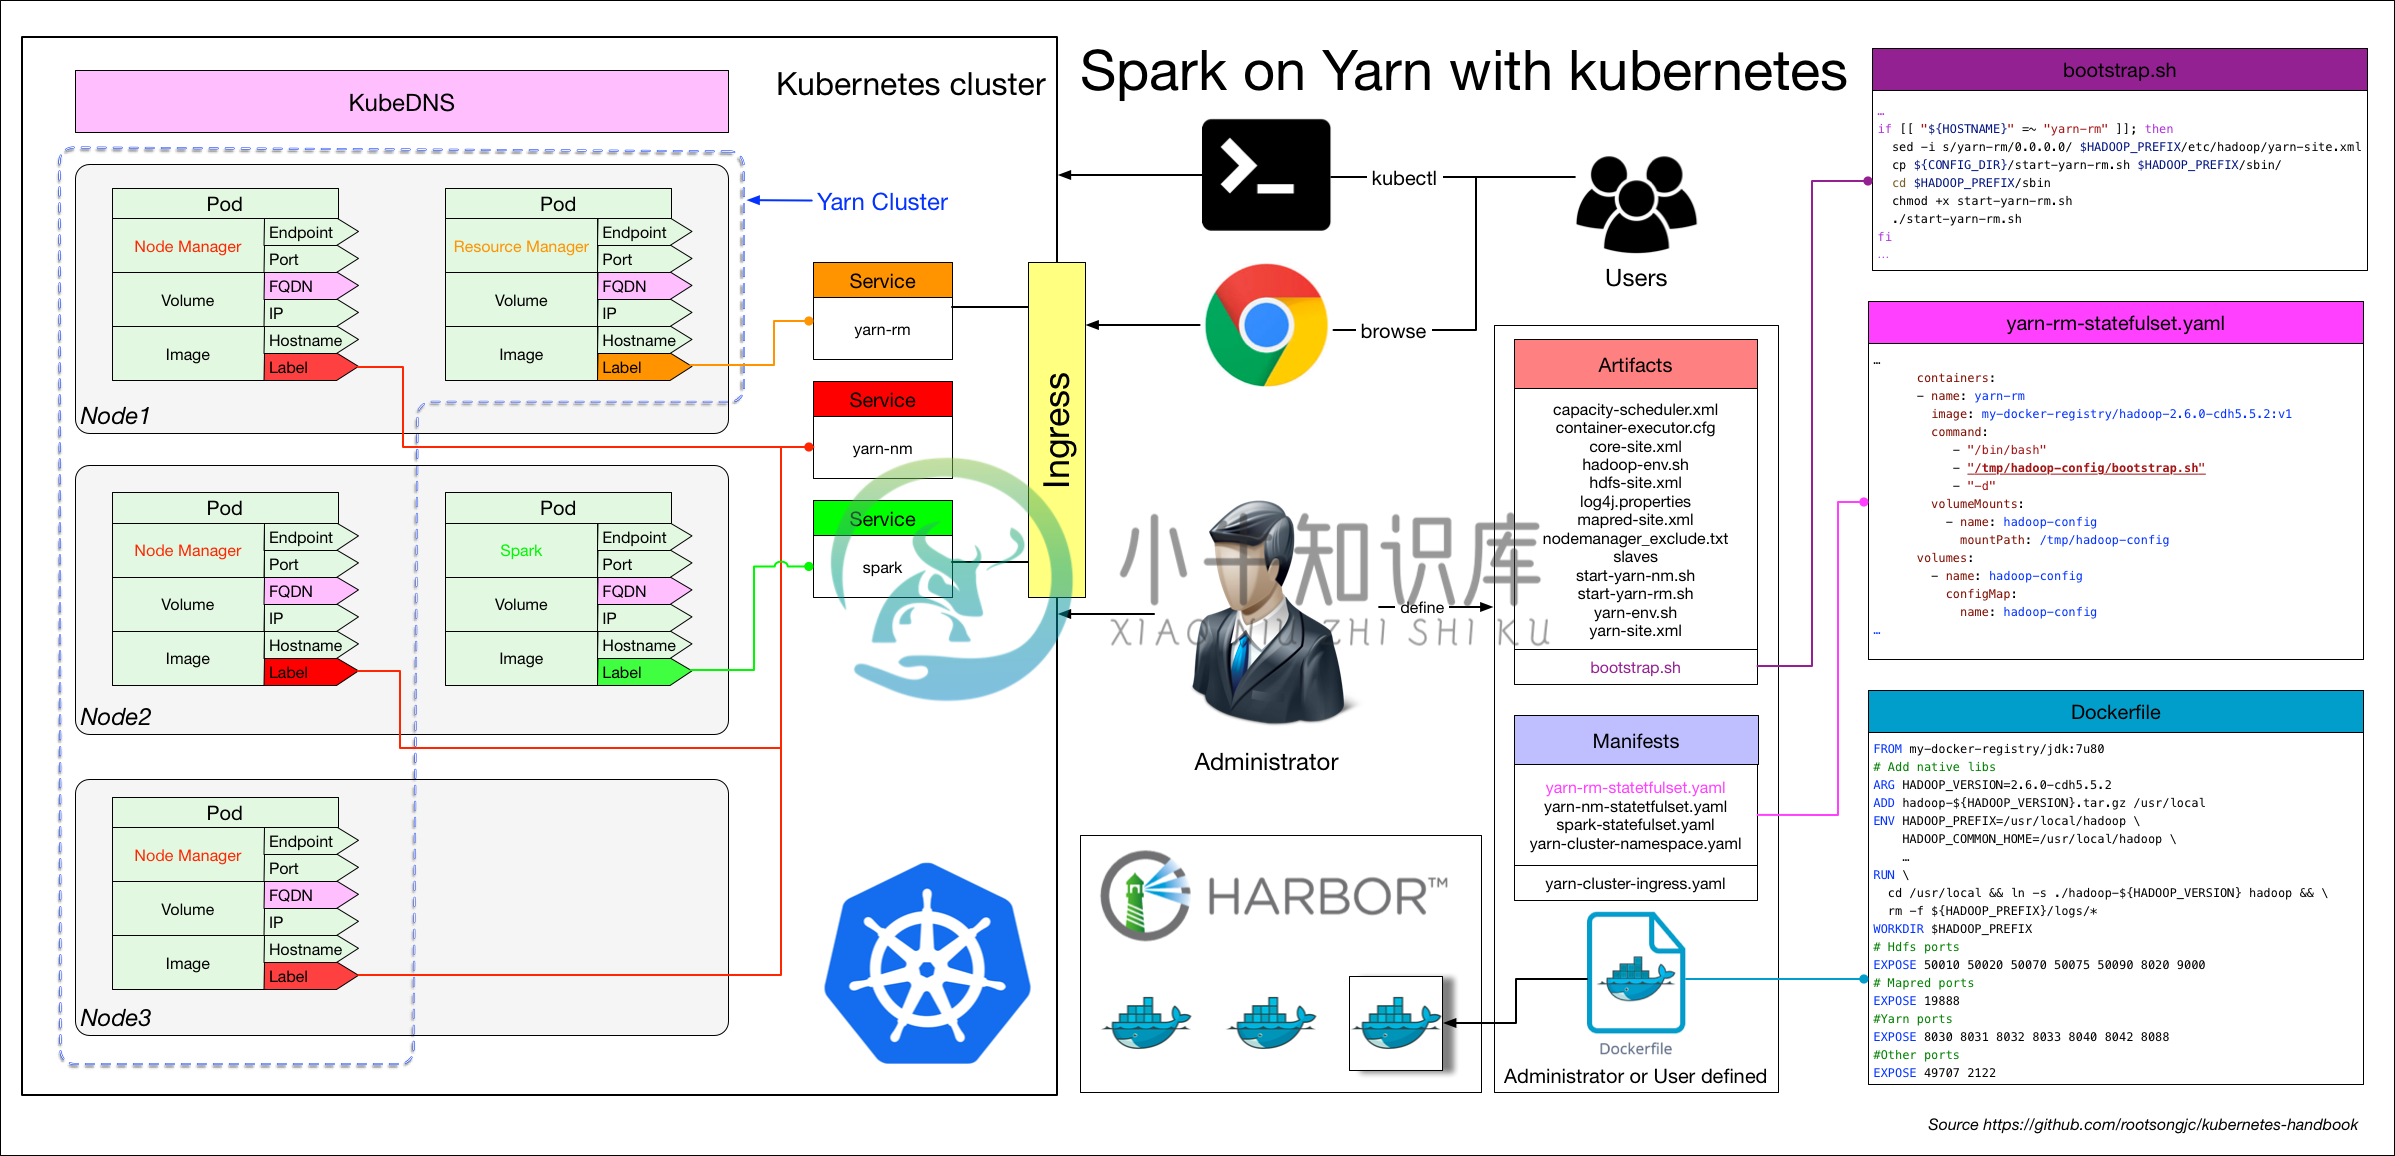 Spark on yarn with kubernetes